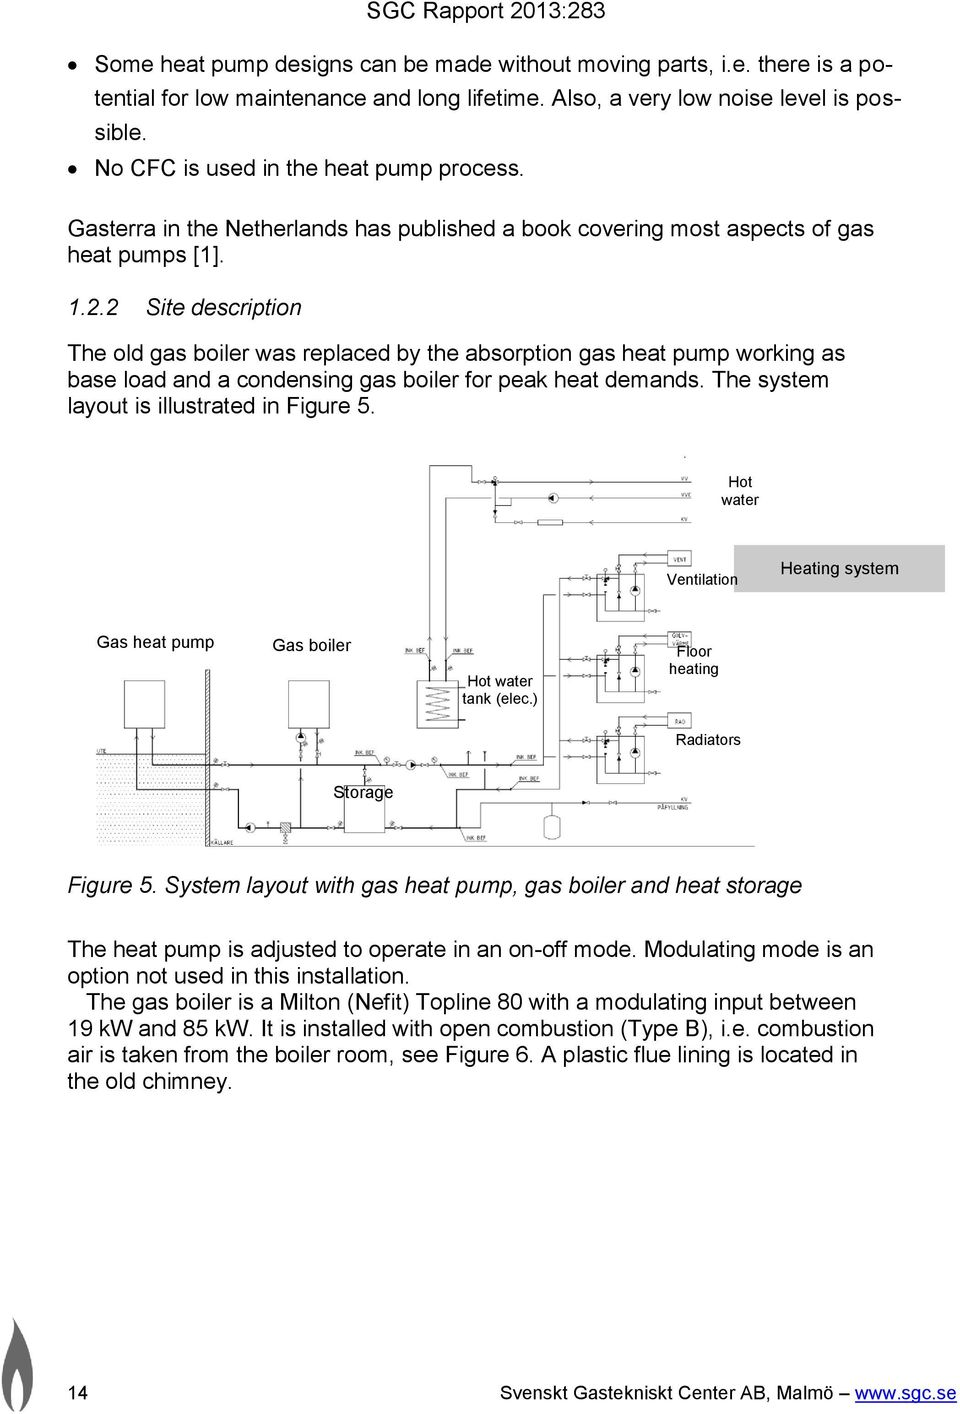 2 Site description The old gas boiler was replaced by the absorption gas heat pump working as base load and a condensing gas boiler for peak heat demands. The system layout is illustrated in Figure 5.